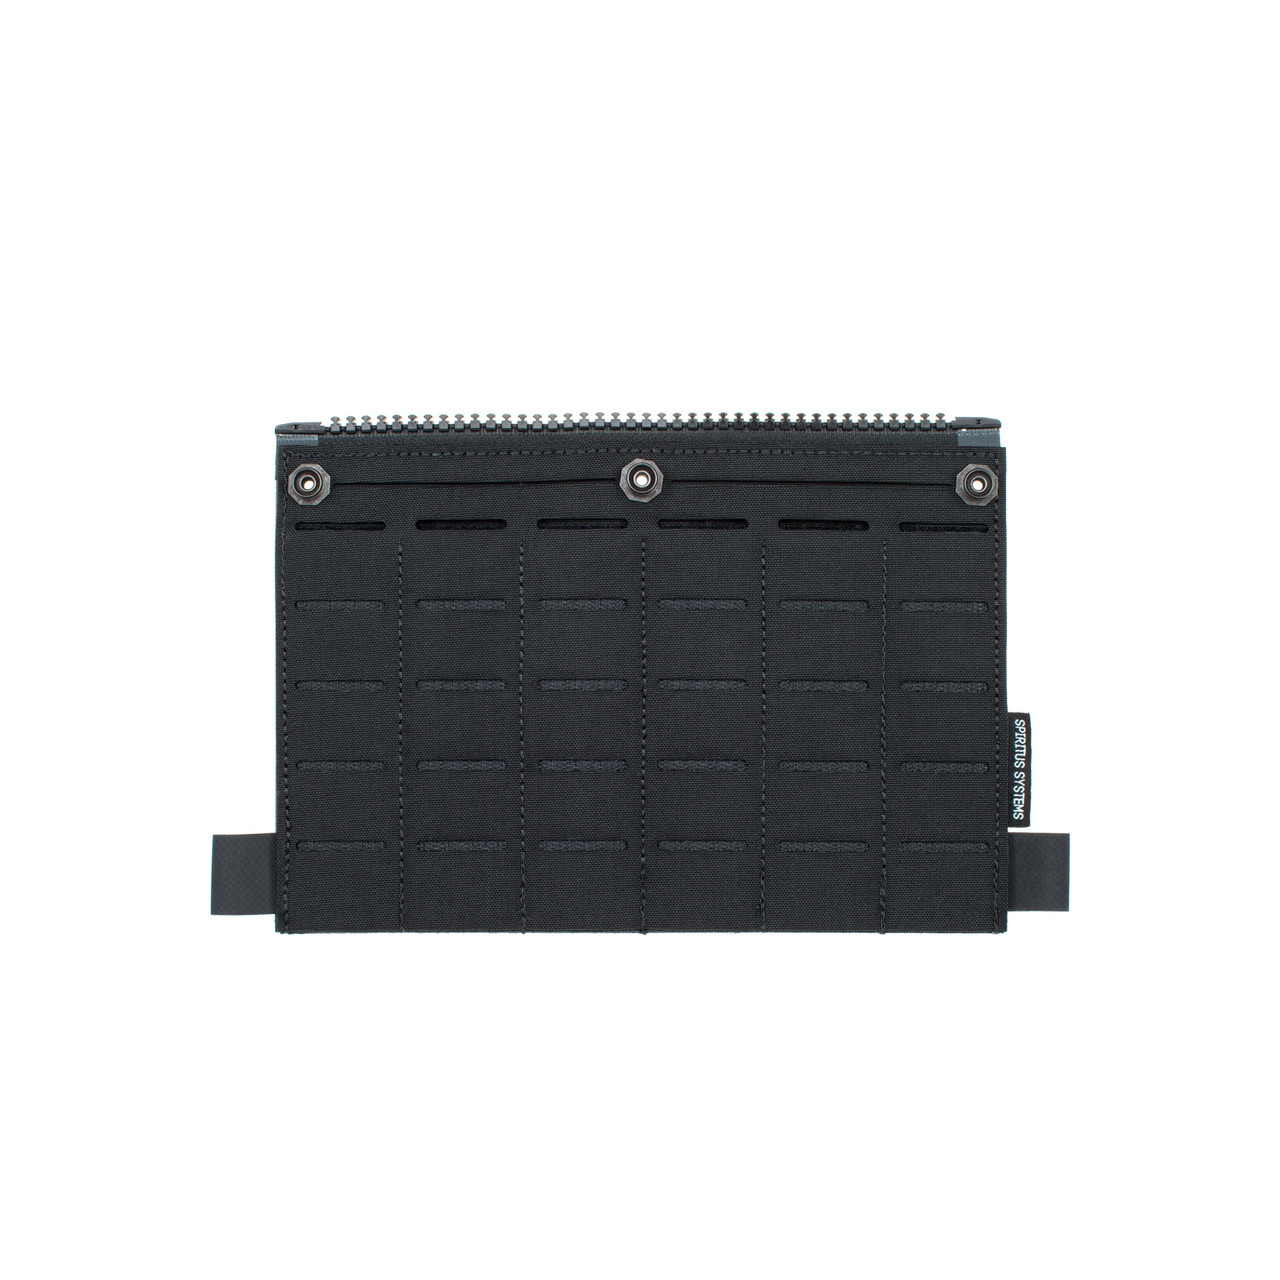 Spiritus Systems: Back Panel MOLLE Flap